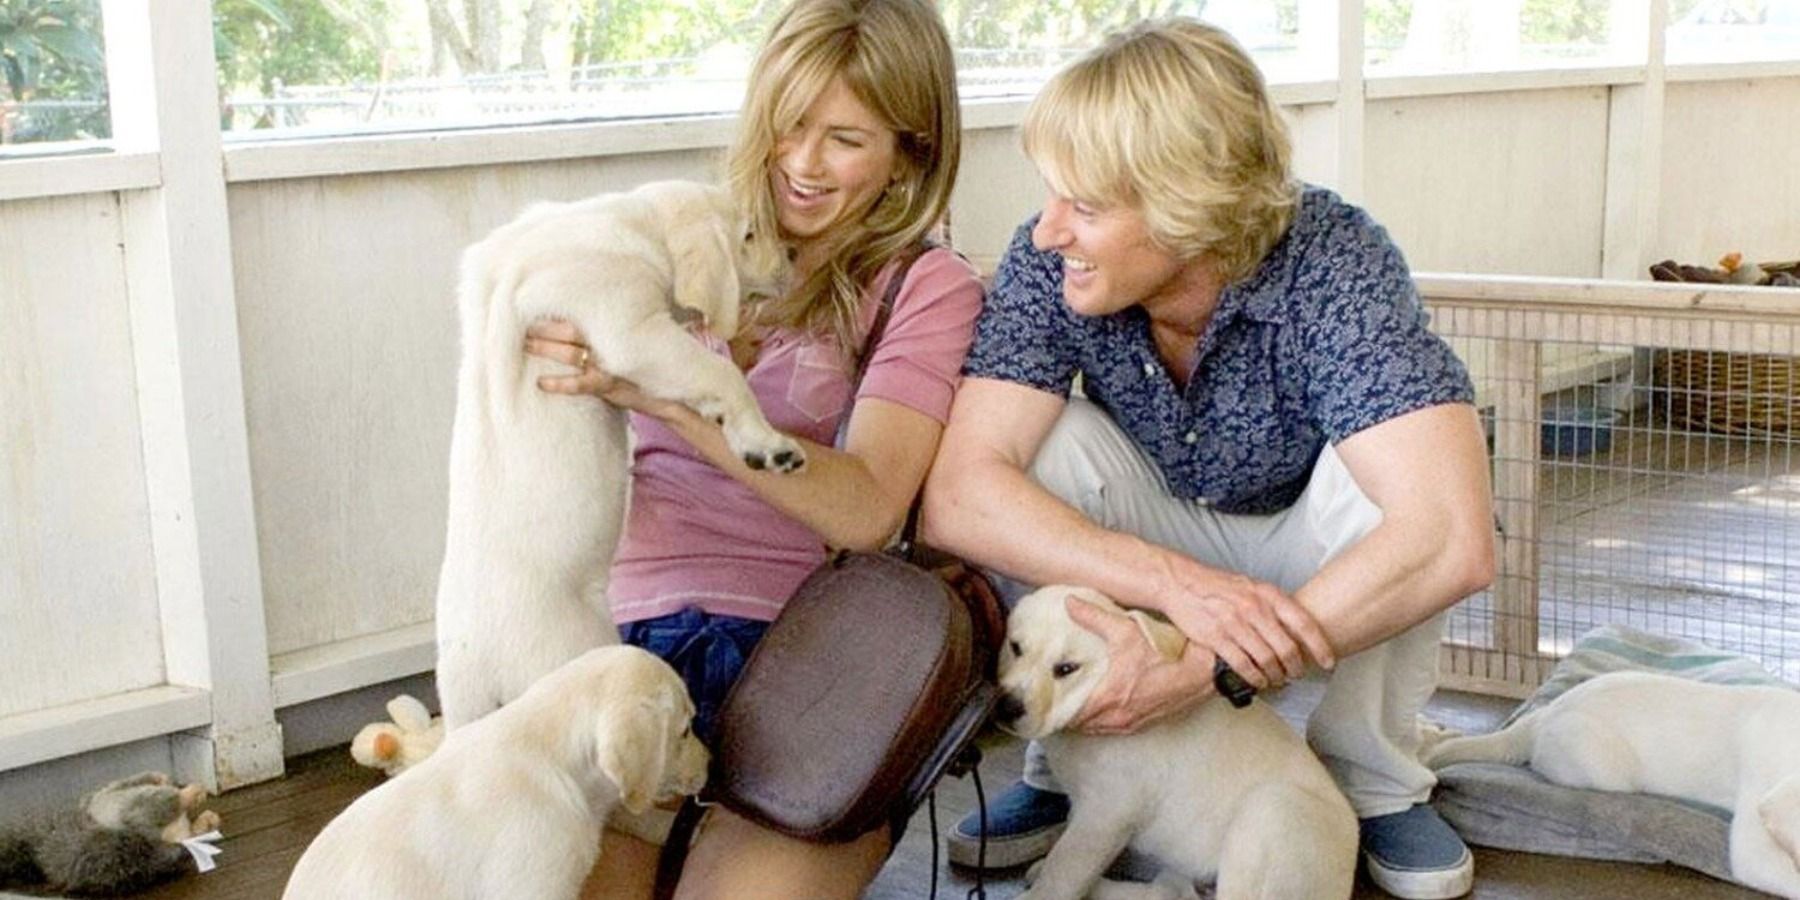 Dog Movie Marley & Me seeing the puppies